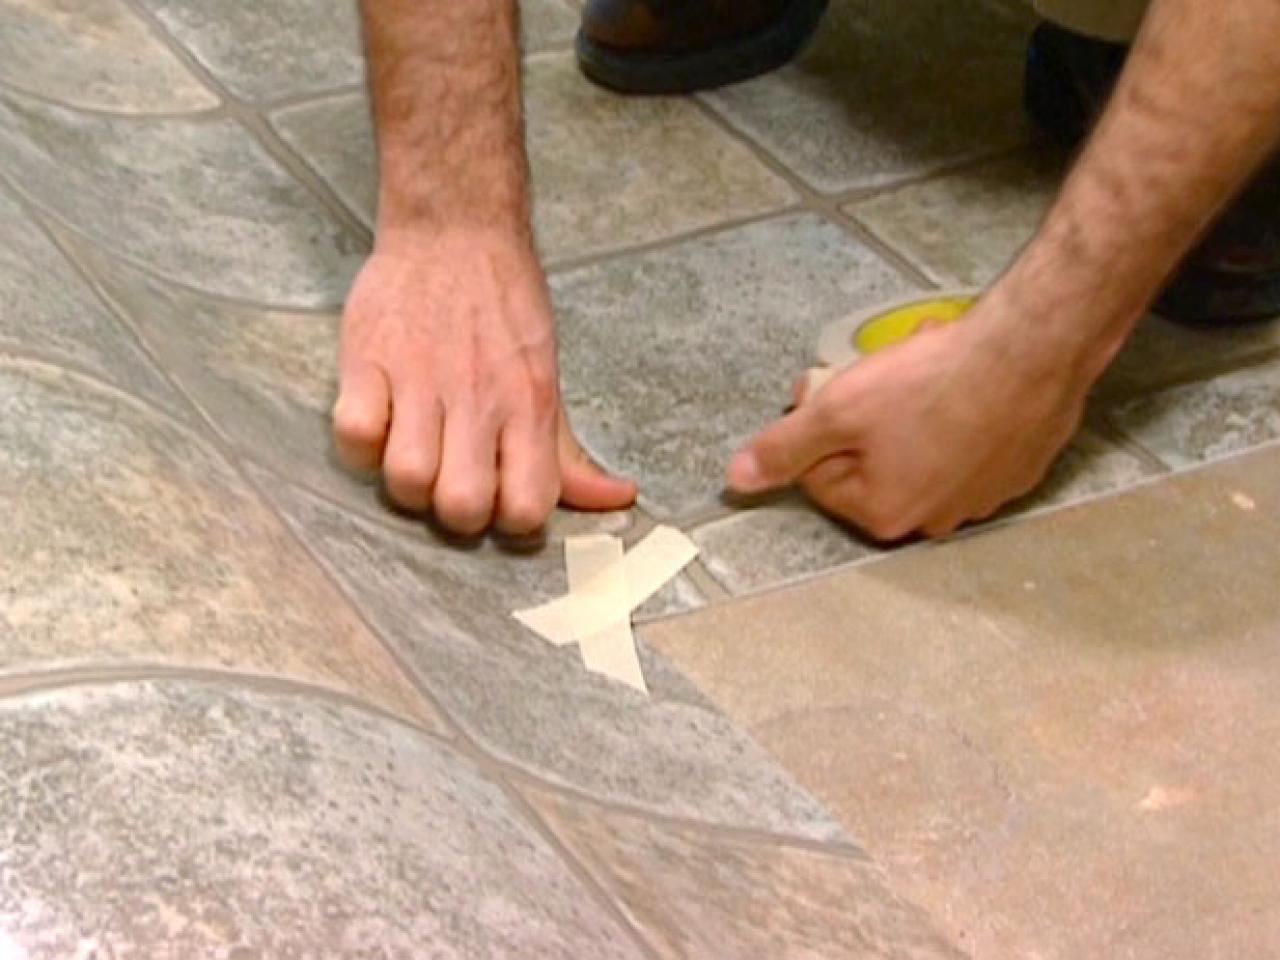 How To Install Vinyl Flooring Tos, Laying Sticky Back Floor Tiles